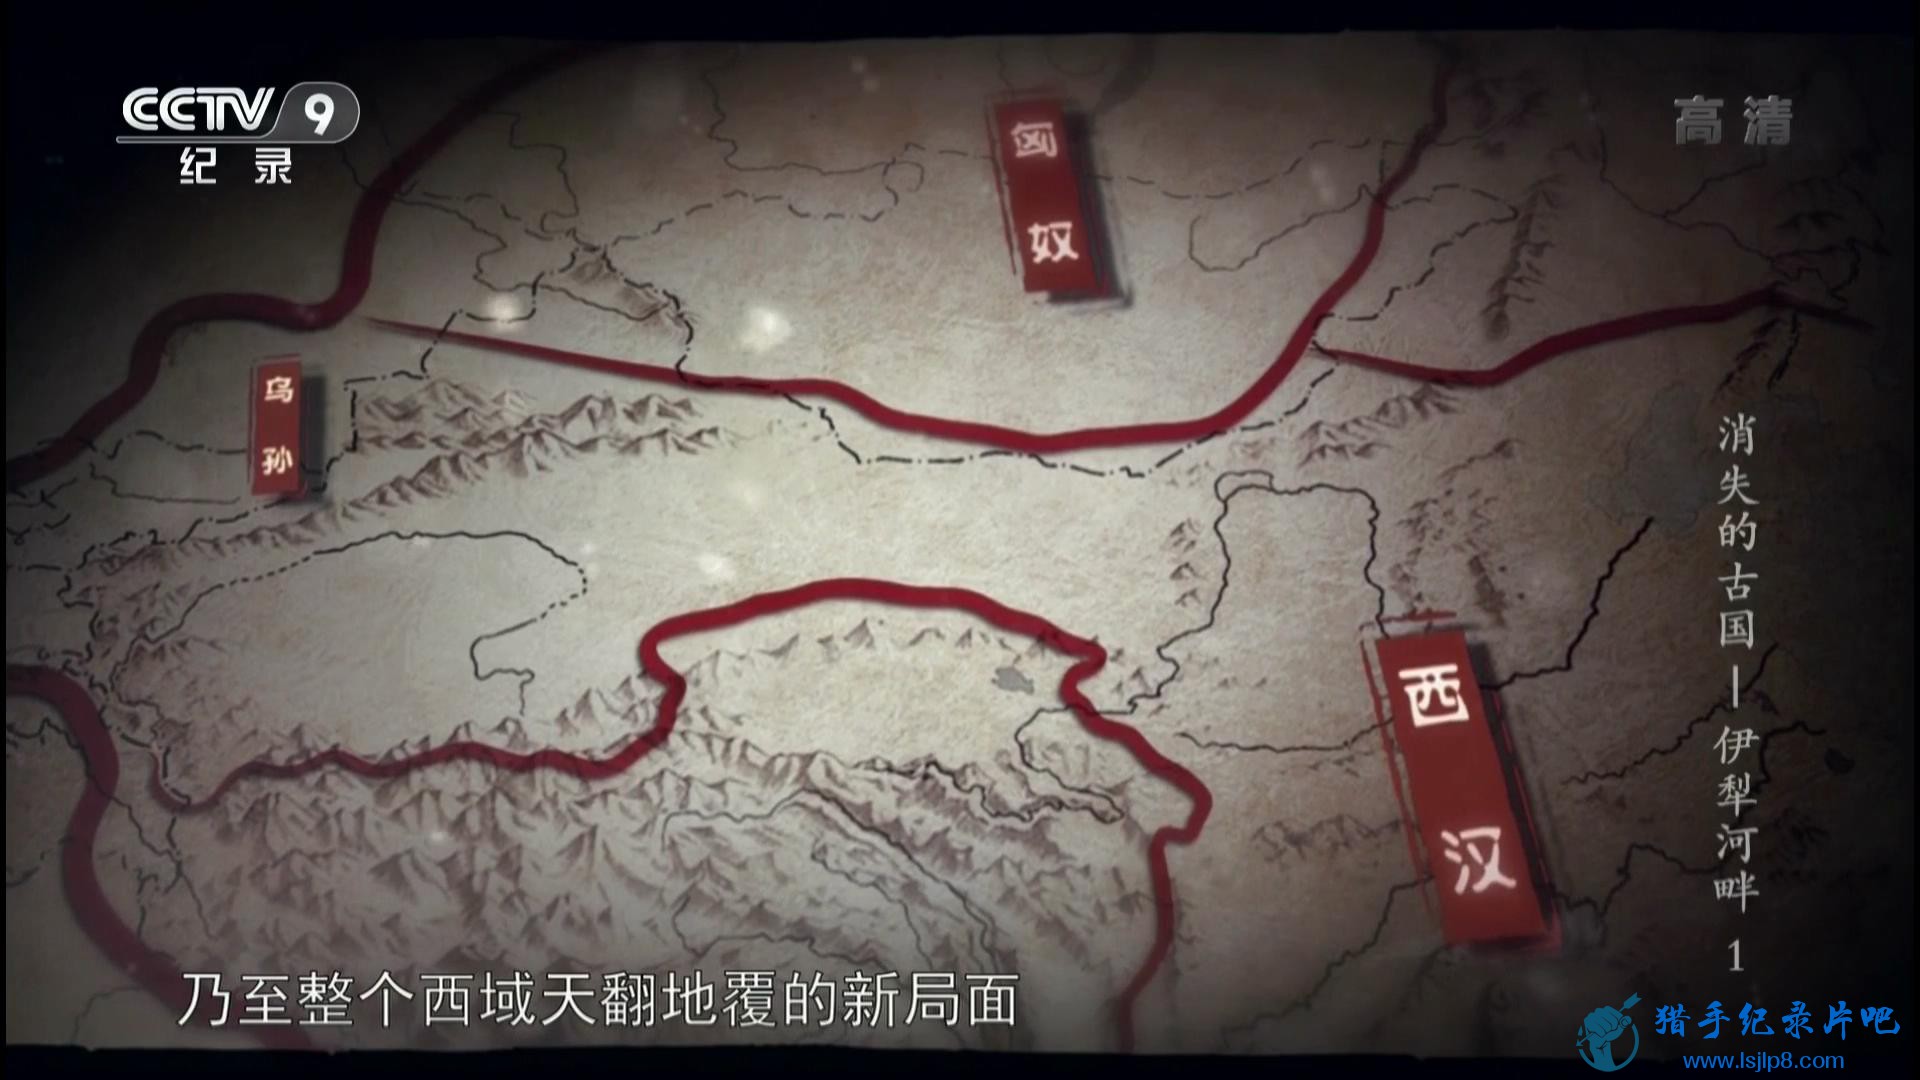 20150907_CCTV-9_Special.Edition-The.Disappeared.Ancient.States.by.the.Ili.River..jpg